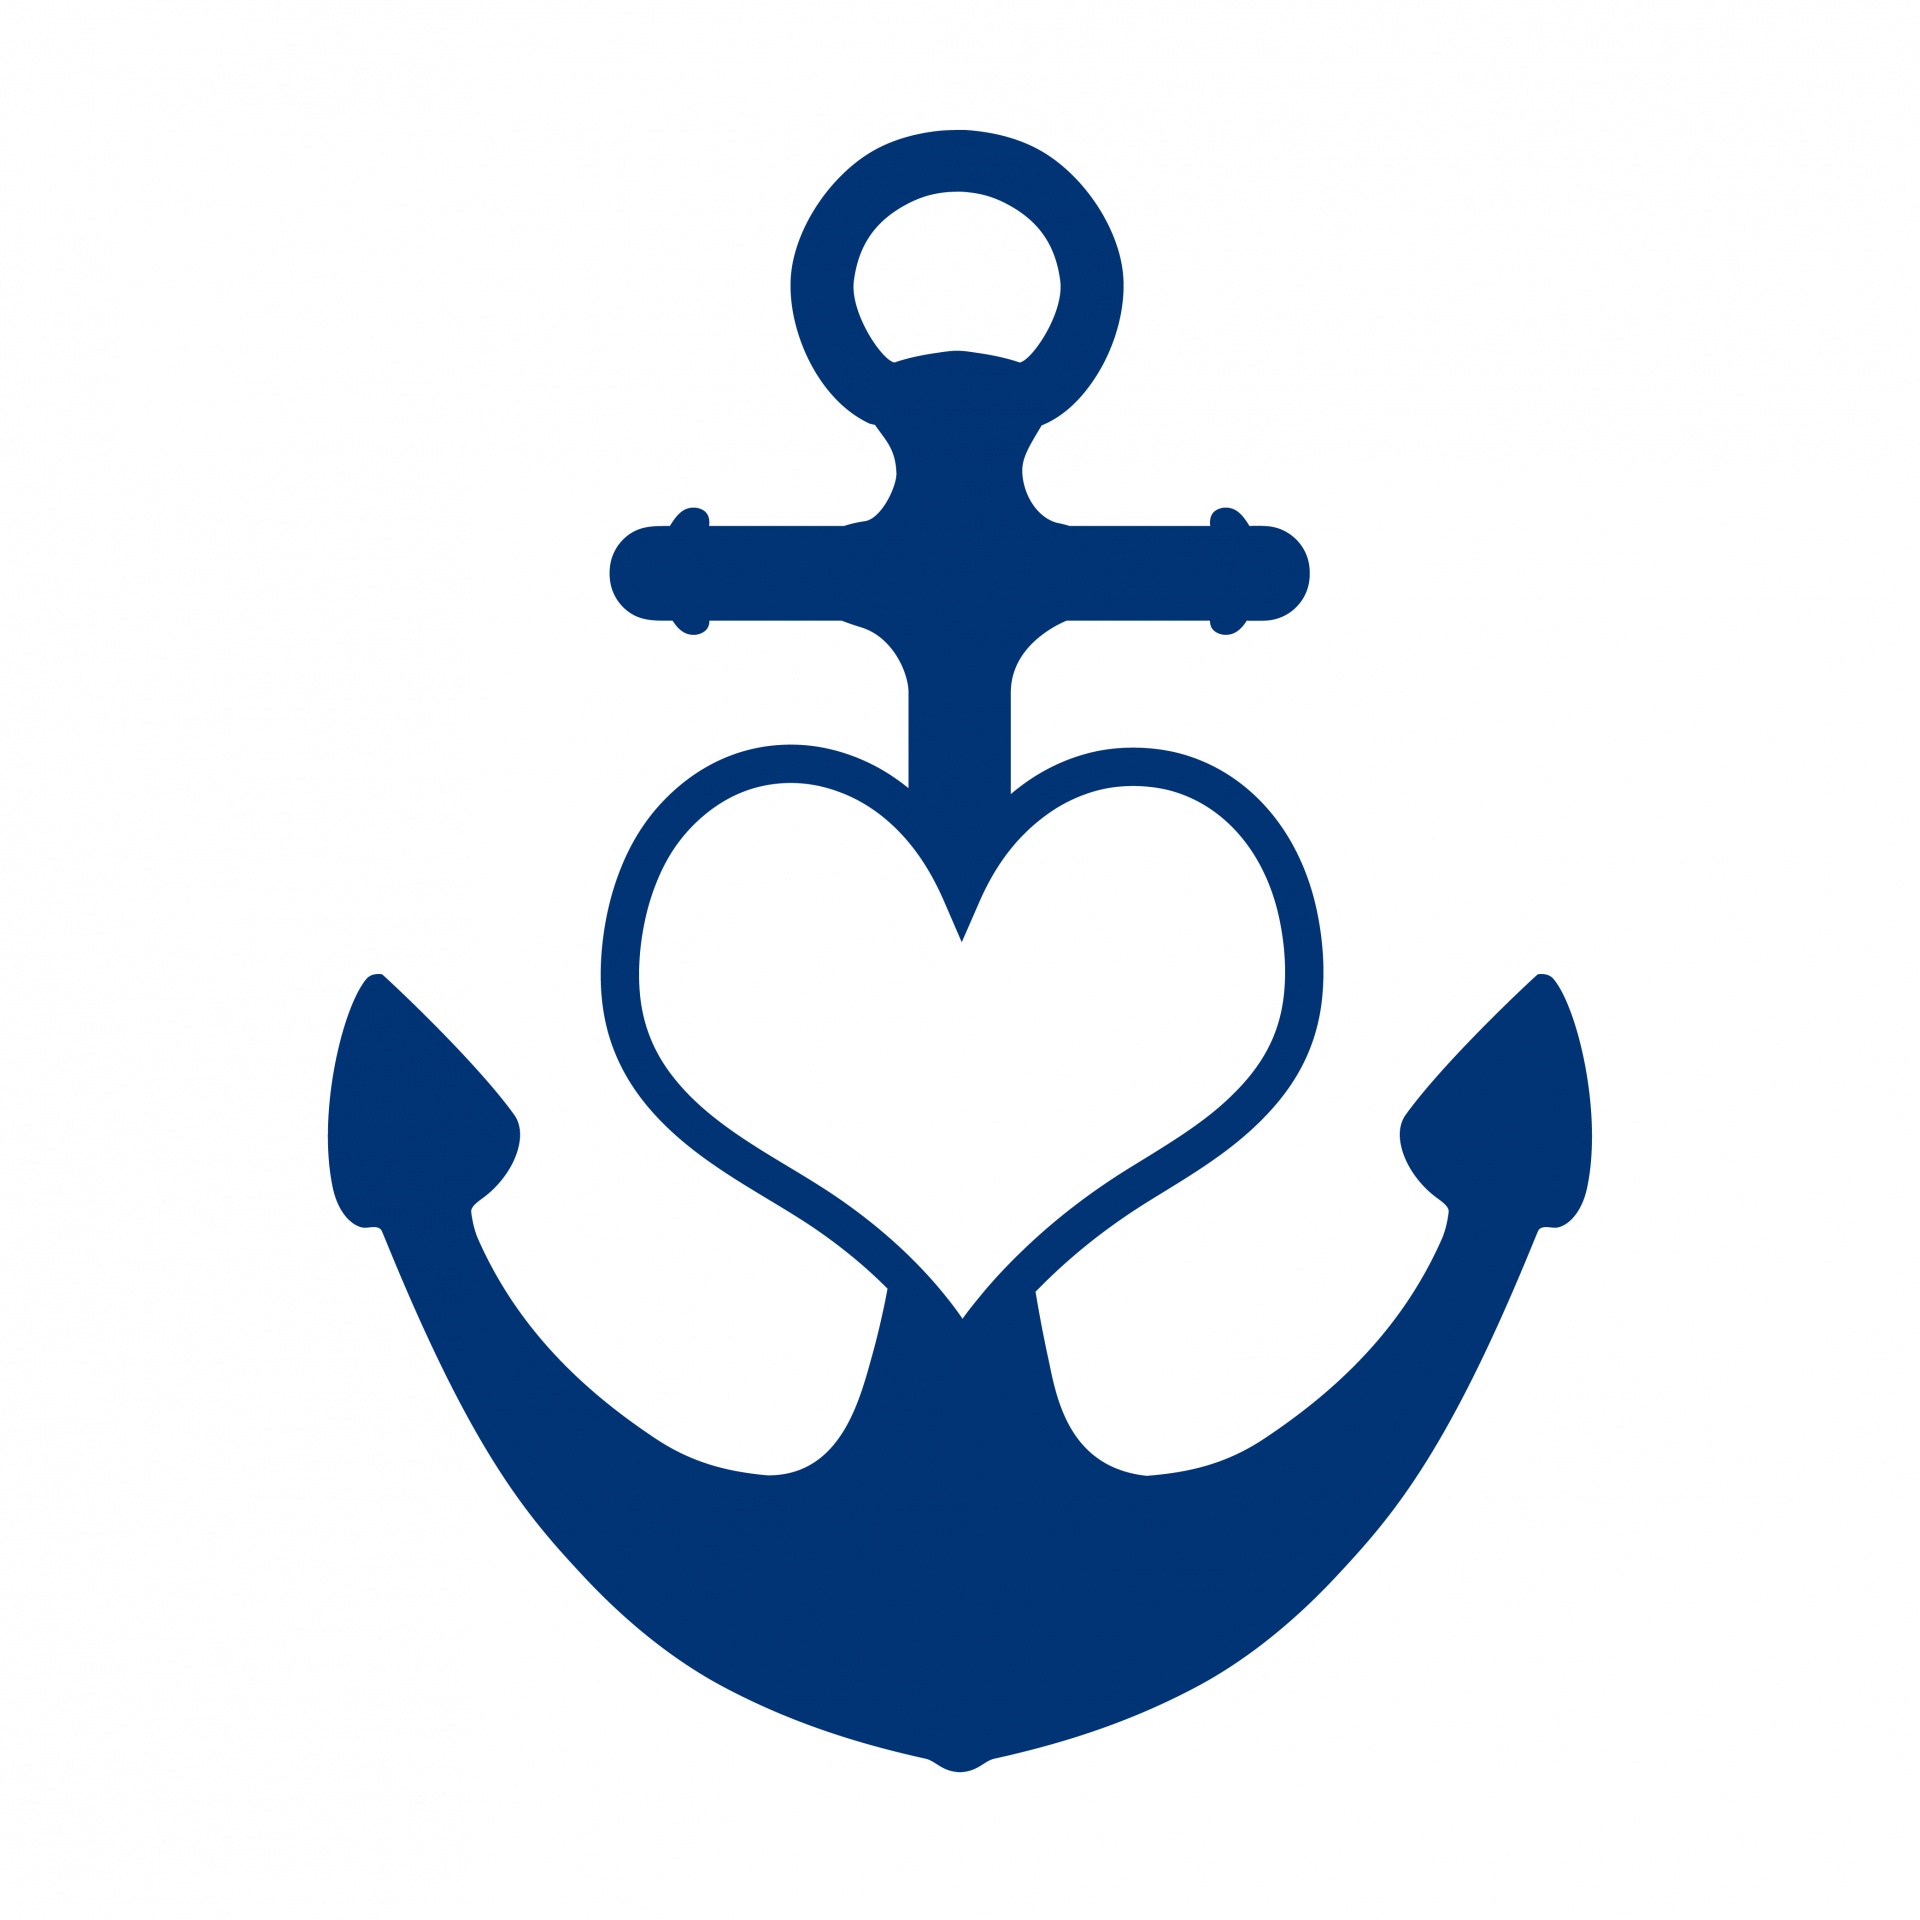 Anchor Heart Nautical Clipart Free Stock Photo - Public Domain Pictures